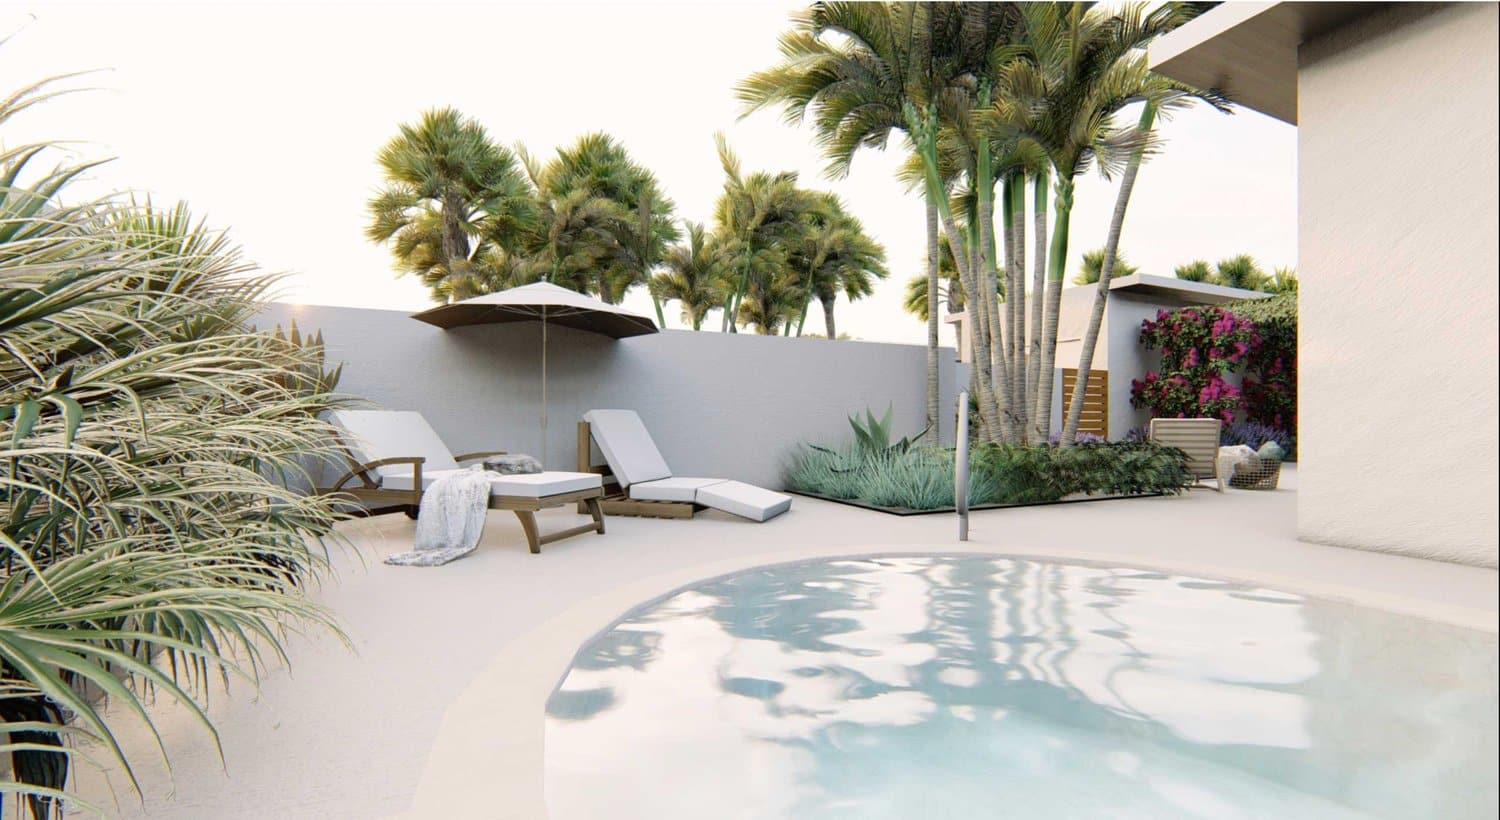 Miami yard with pool and lounge chairs with shade